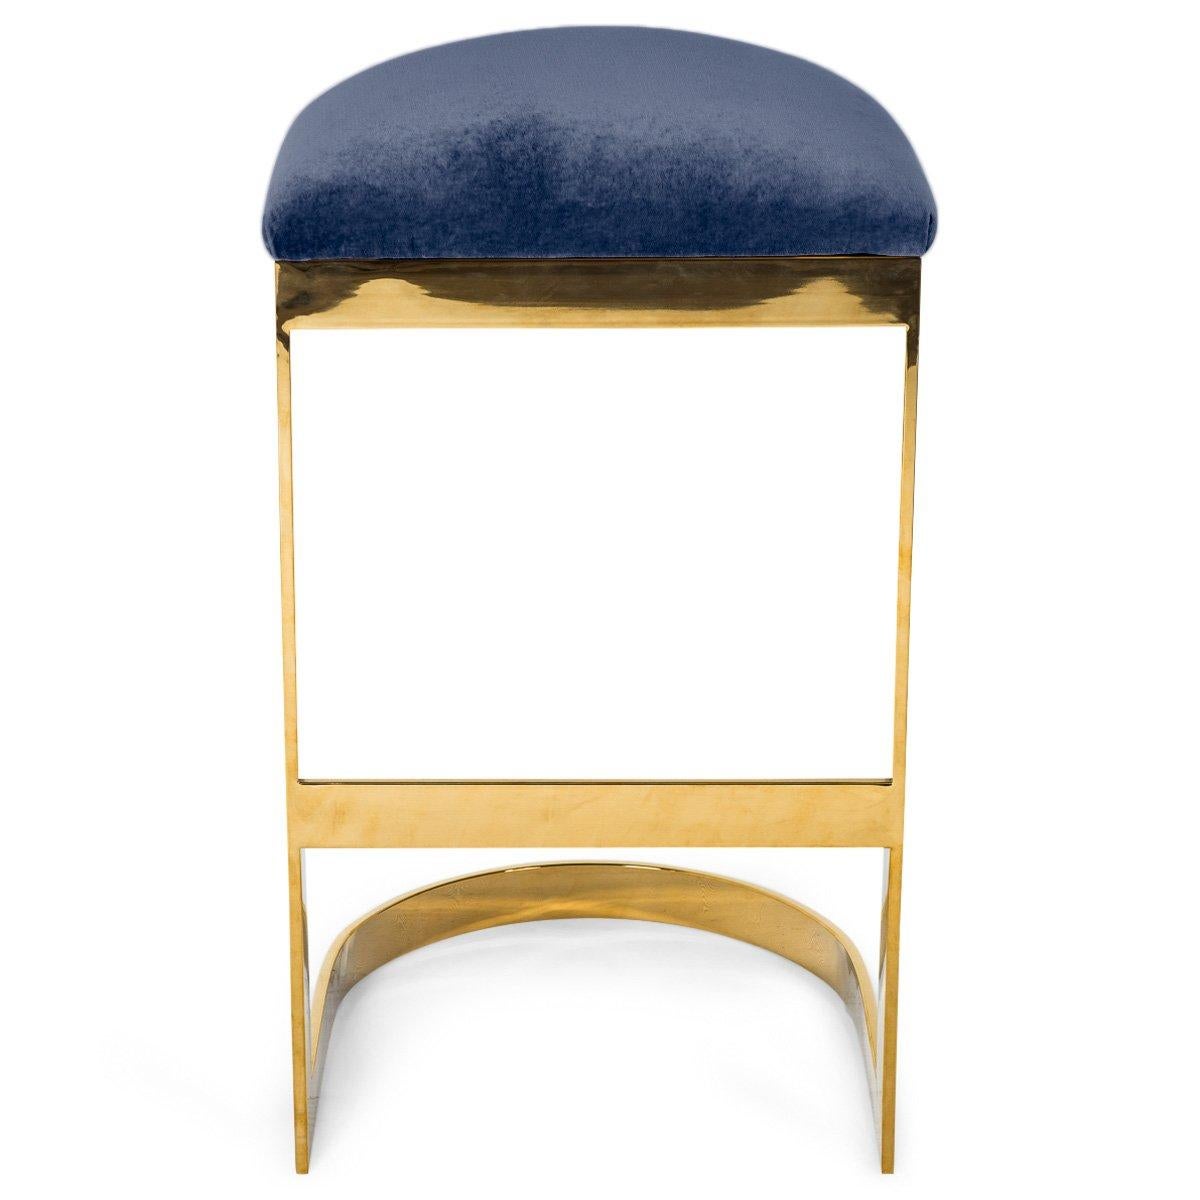 Contemporary Modern Style Backless Counter Stool in Velvet with a Polished Solid Brass Frame For Sale